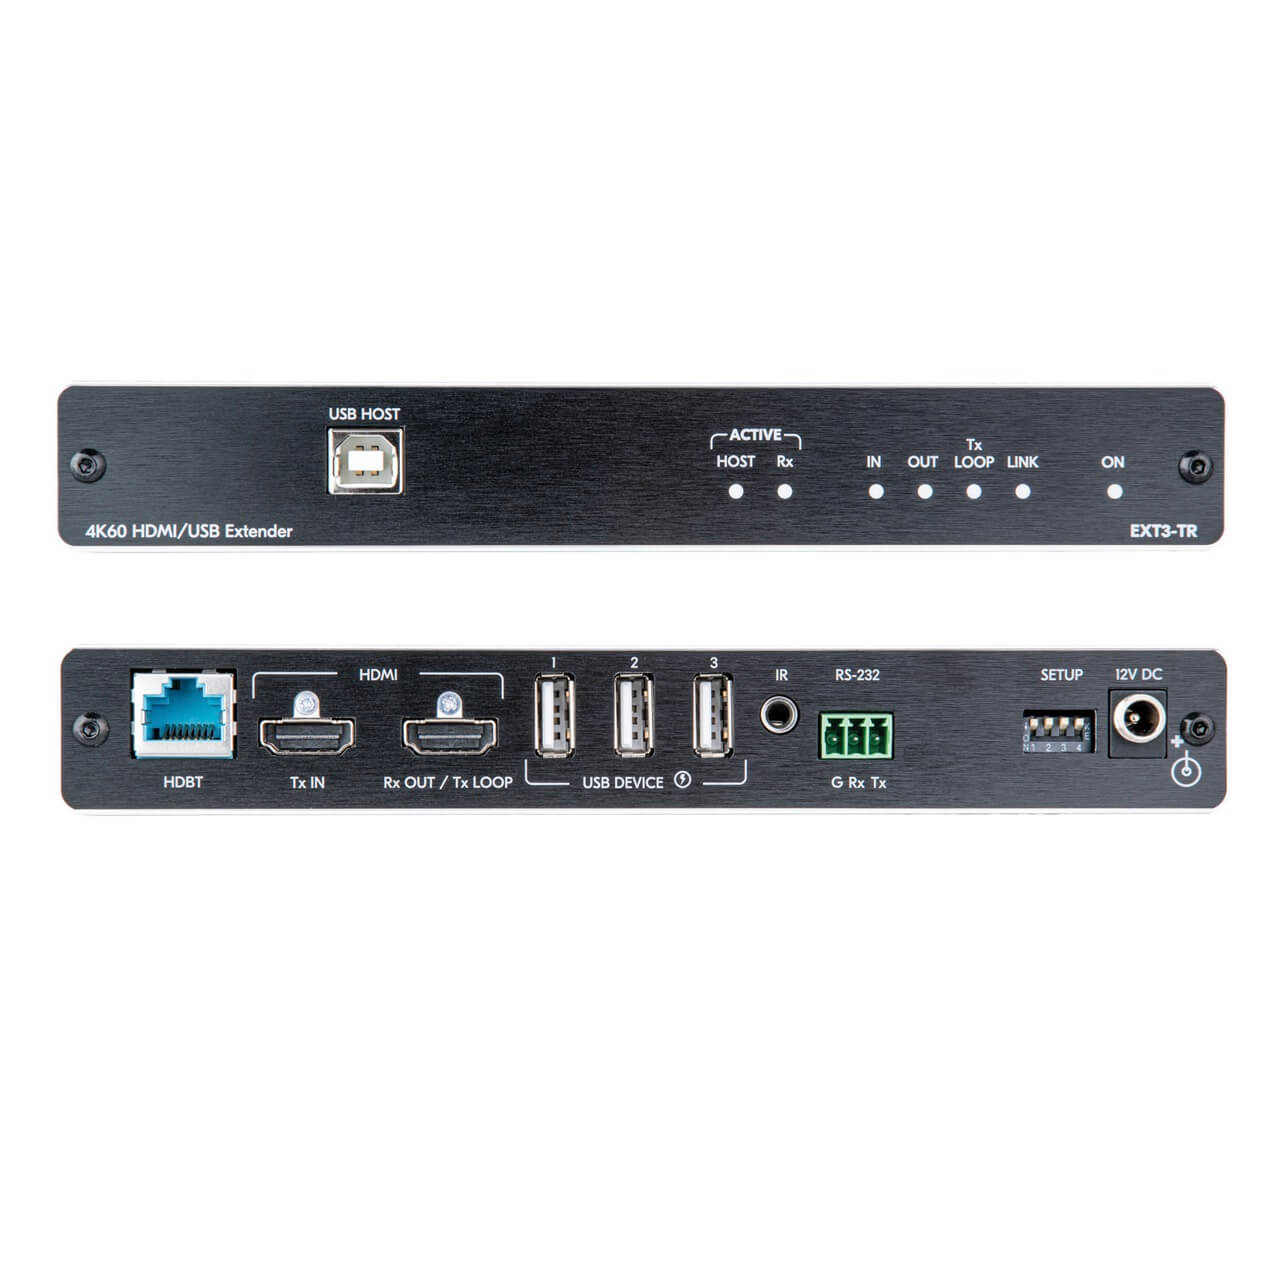 Kramer EXT3-TR - 4K60 HDMI and USB 2.0 HDBaseT Extender, front and rear combined views